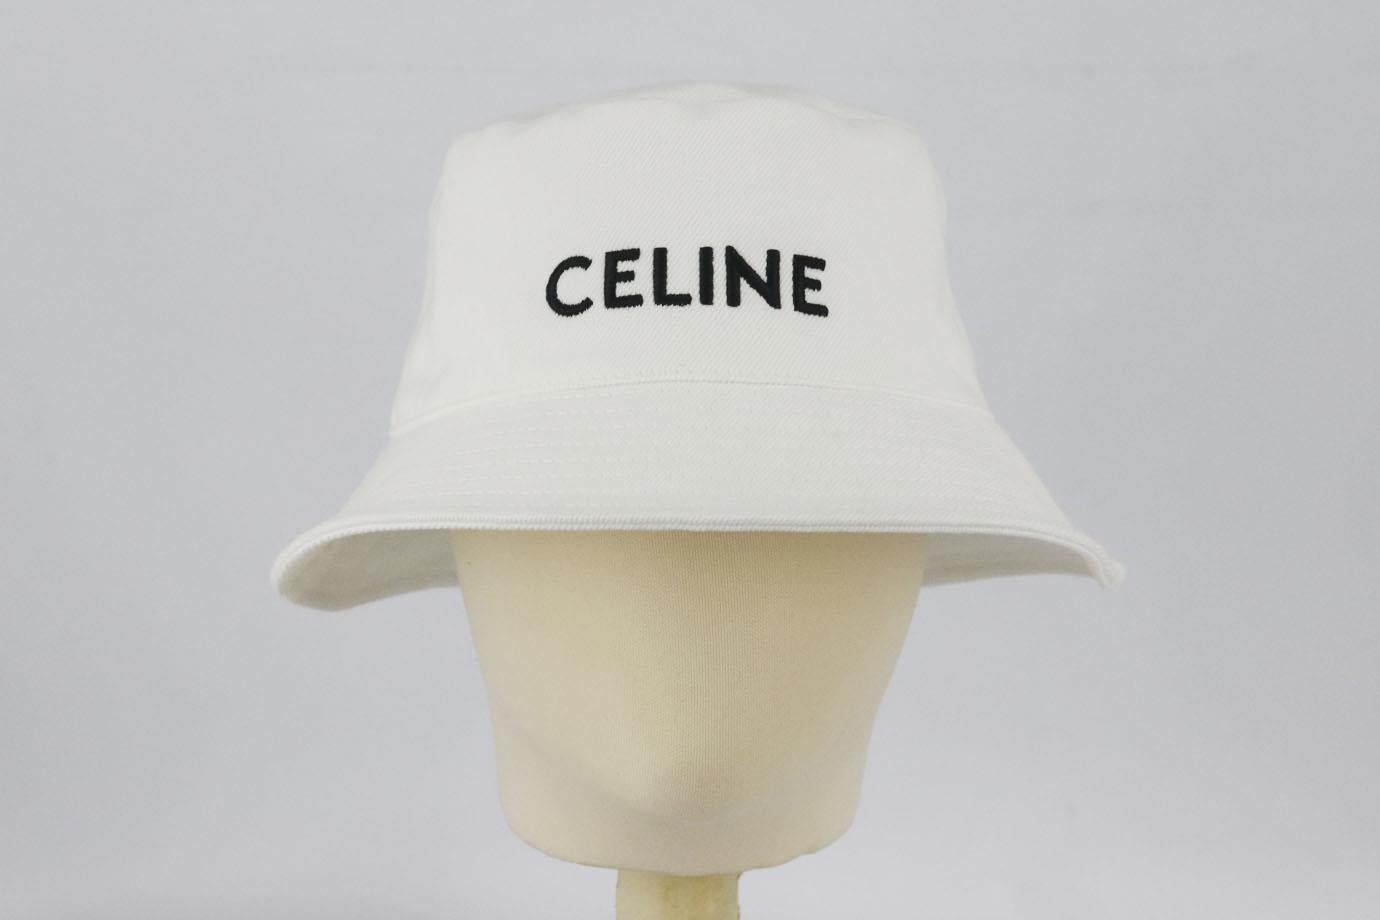 Celine logo embroidered cotton twill bucket hat. White and black. Slips on. 100% Cotton; lining: 65% polyester, 35% cotton. Does not come with dustbag or box. Size: Medium (57 cm). Brim width: 2.2 in Very good condition - Small mark on top; see